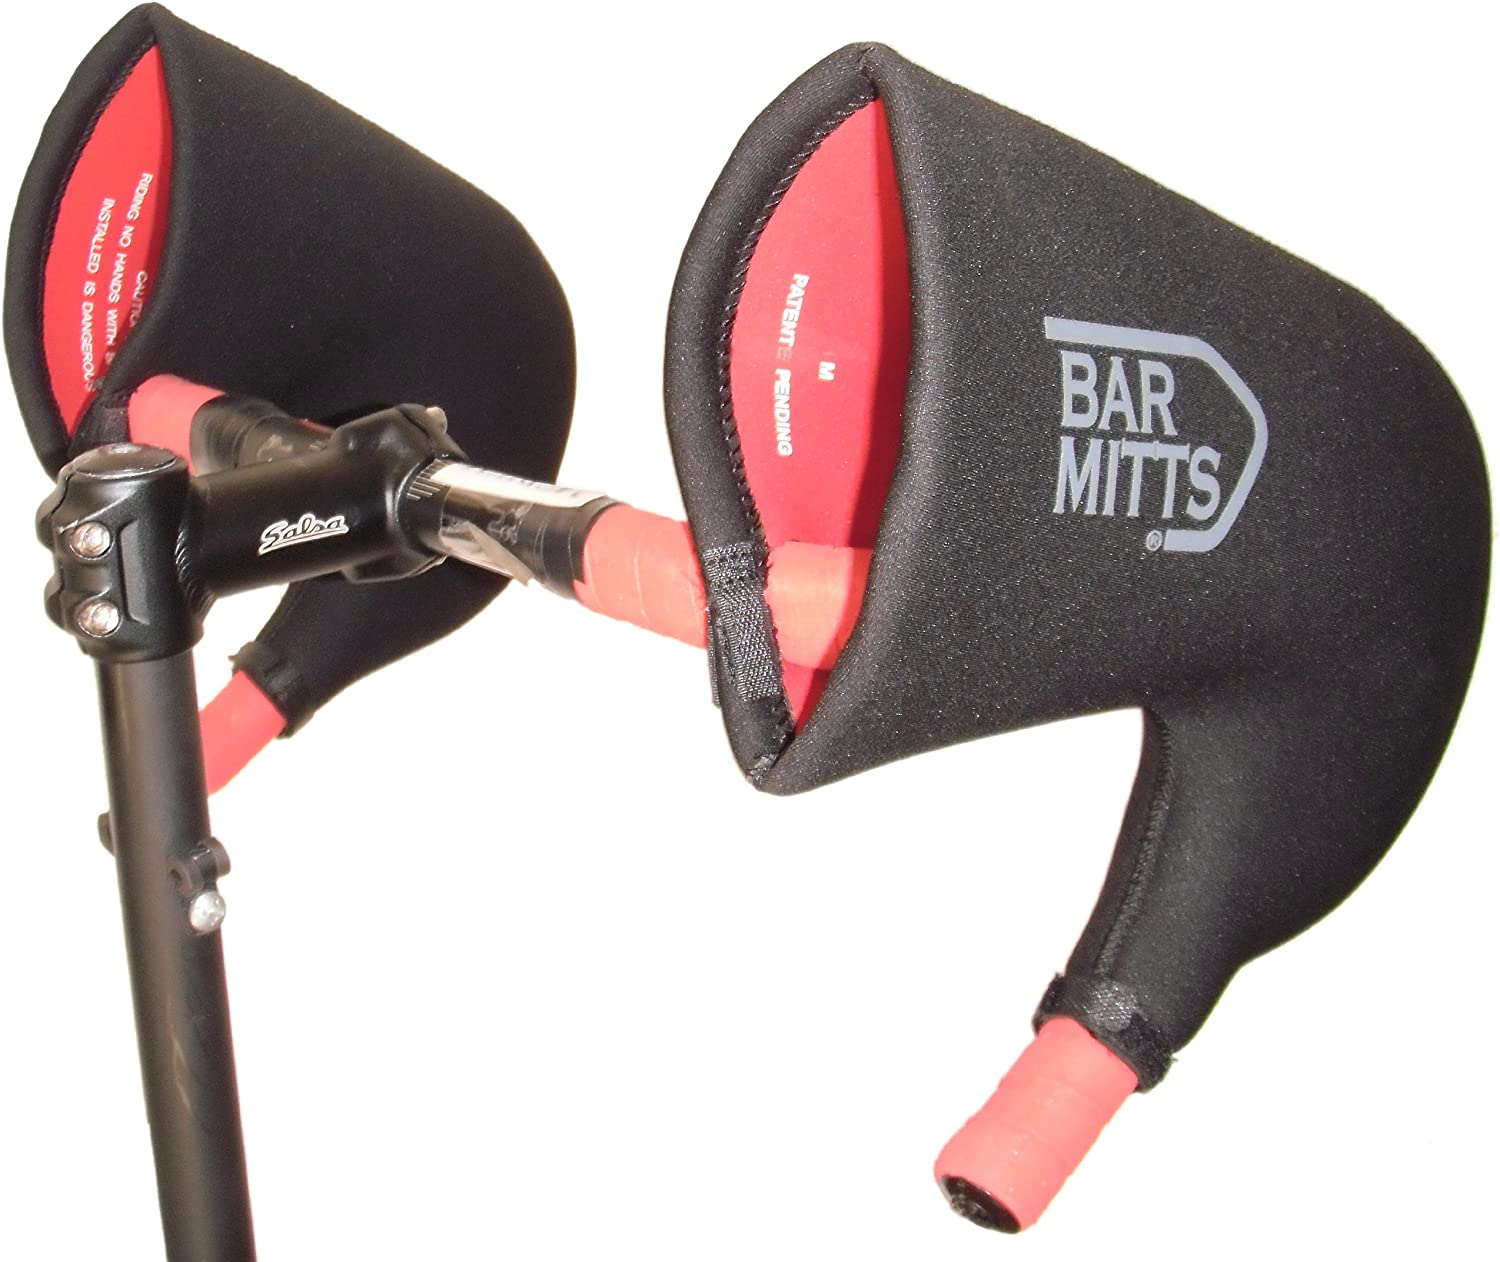 Although bar mitts aren’t actually warmers for your handlebar they can keep your hands warm and dry while riding your mountain bike.